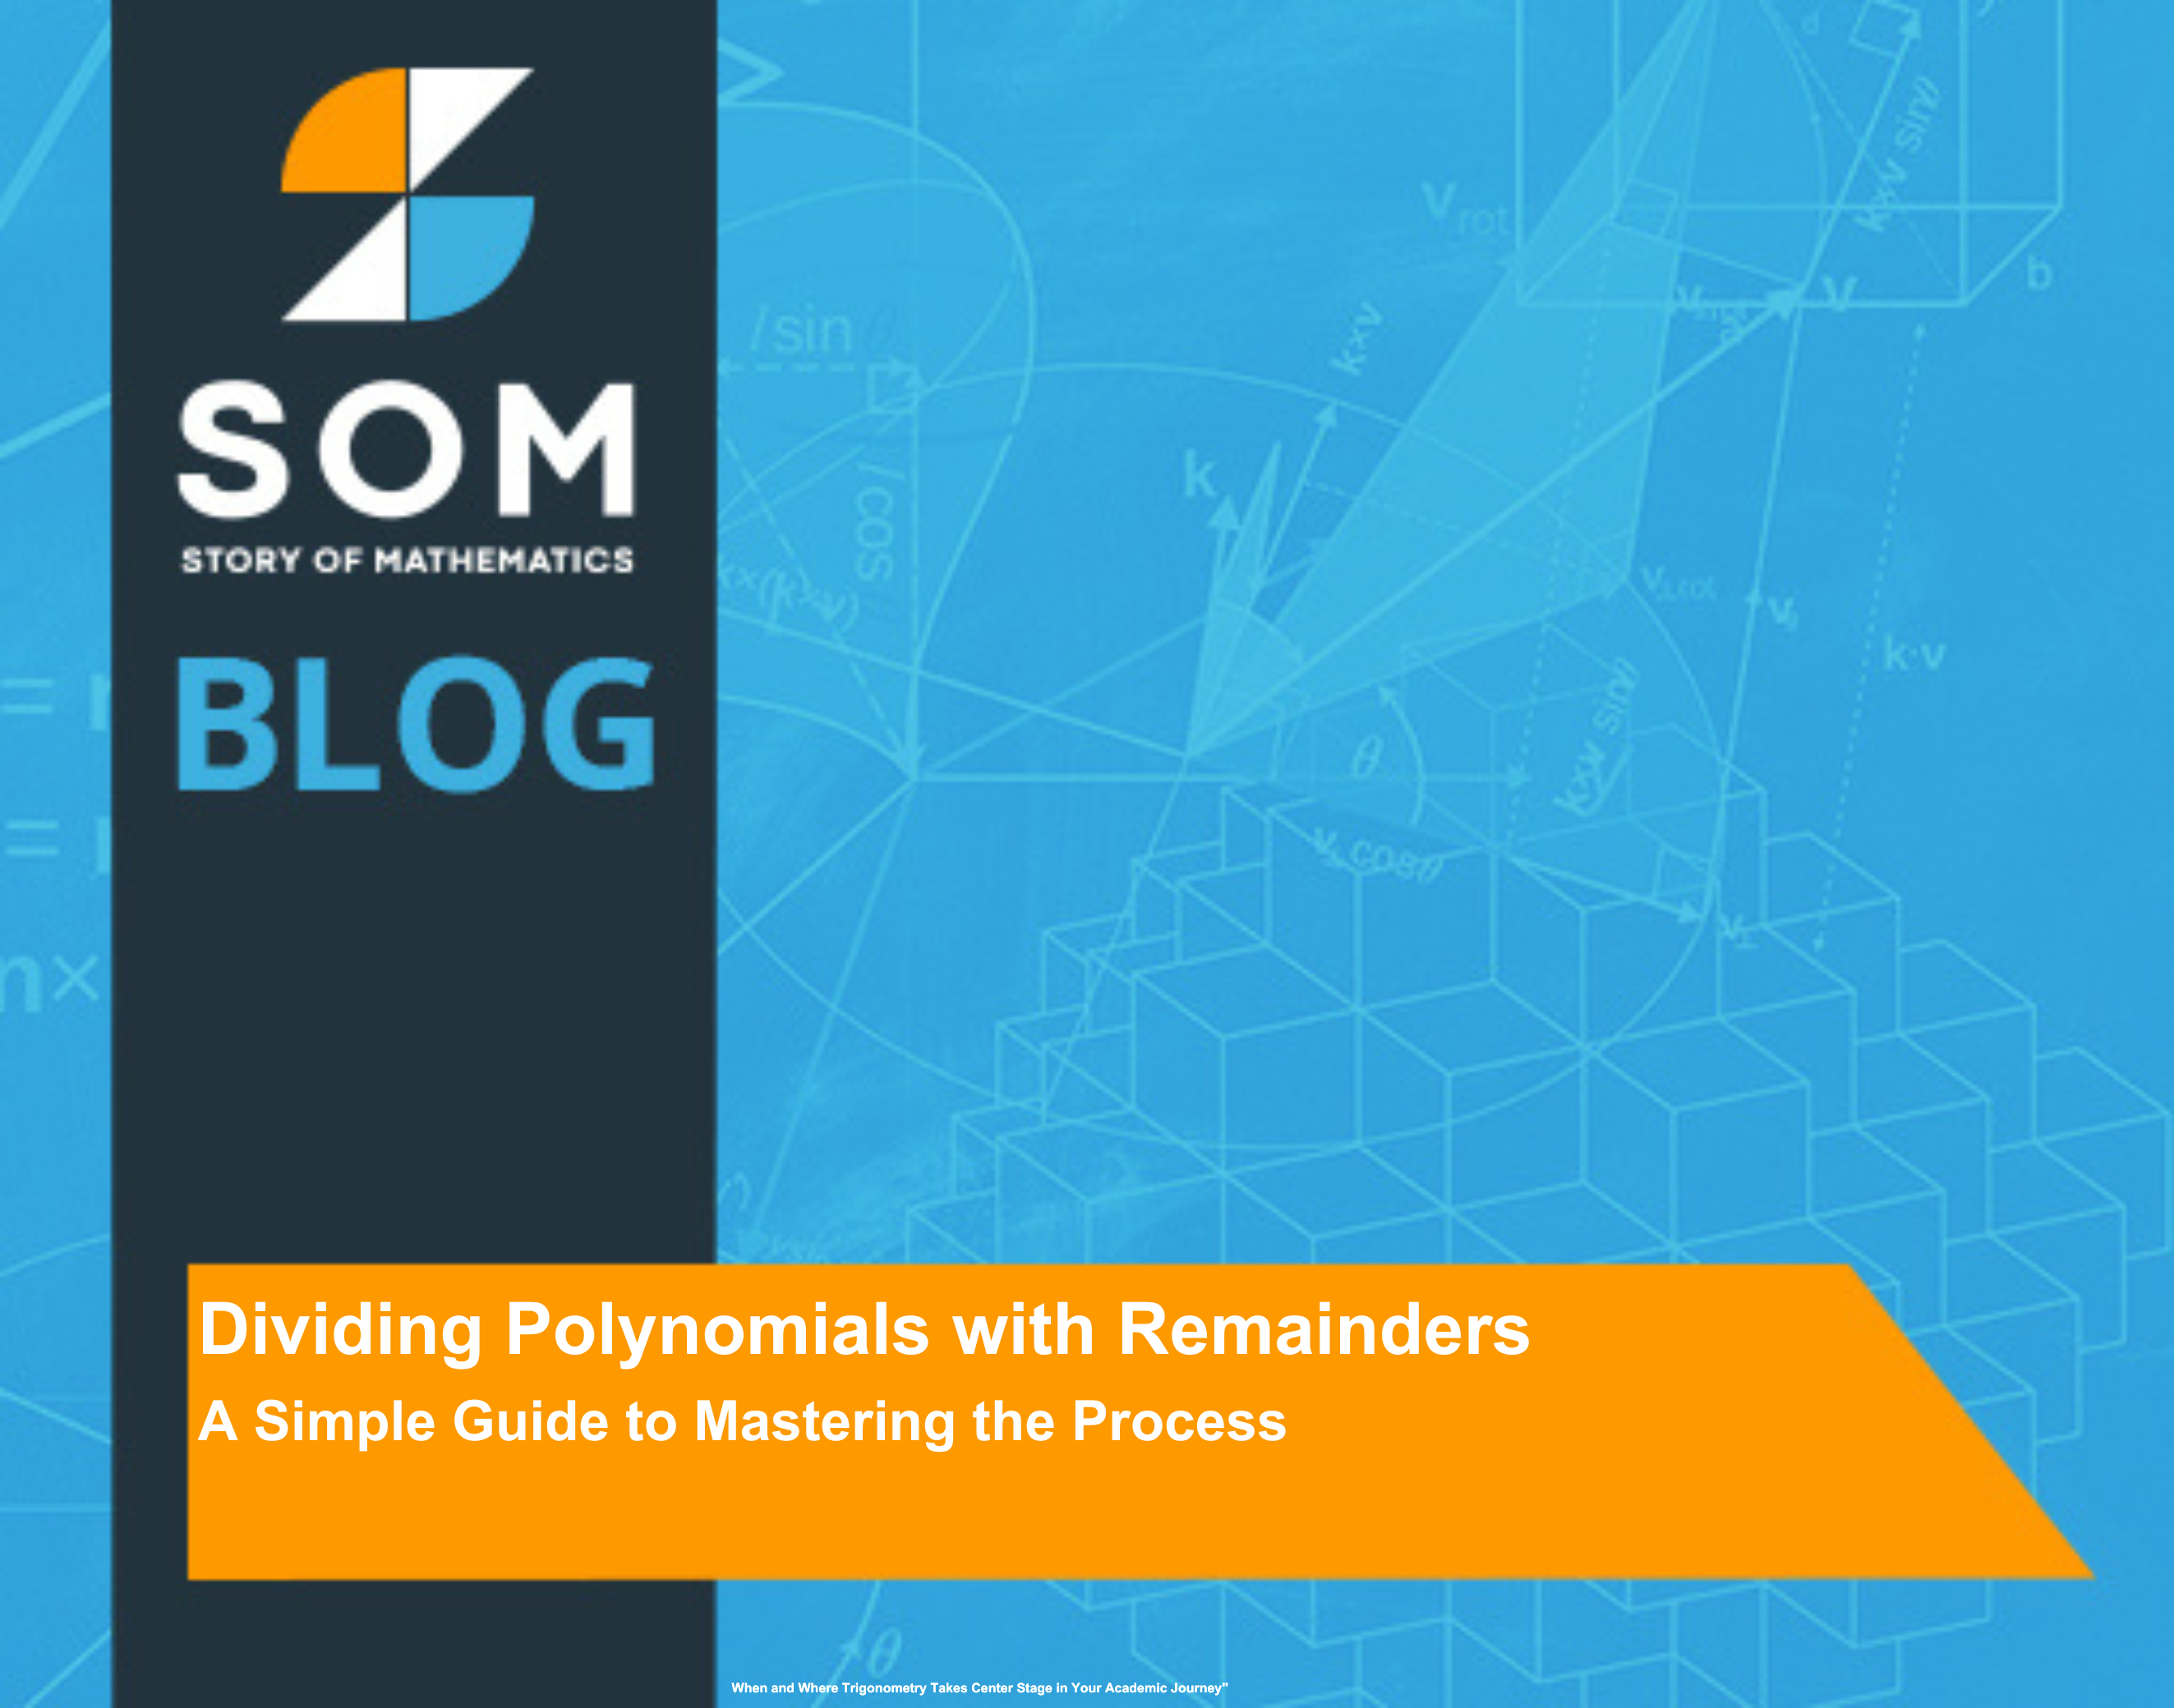 Feature image Dividing Polynomials with Remainders A Simple Guide to Mastering the Process